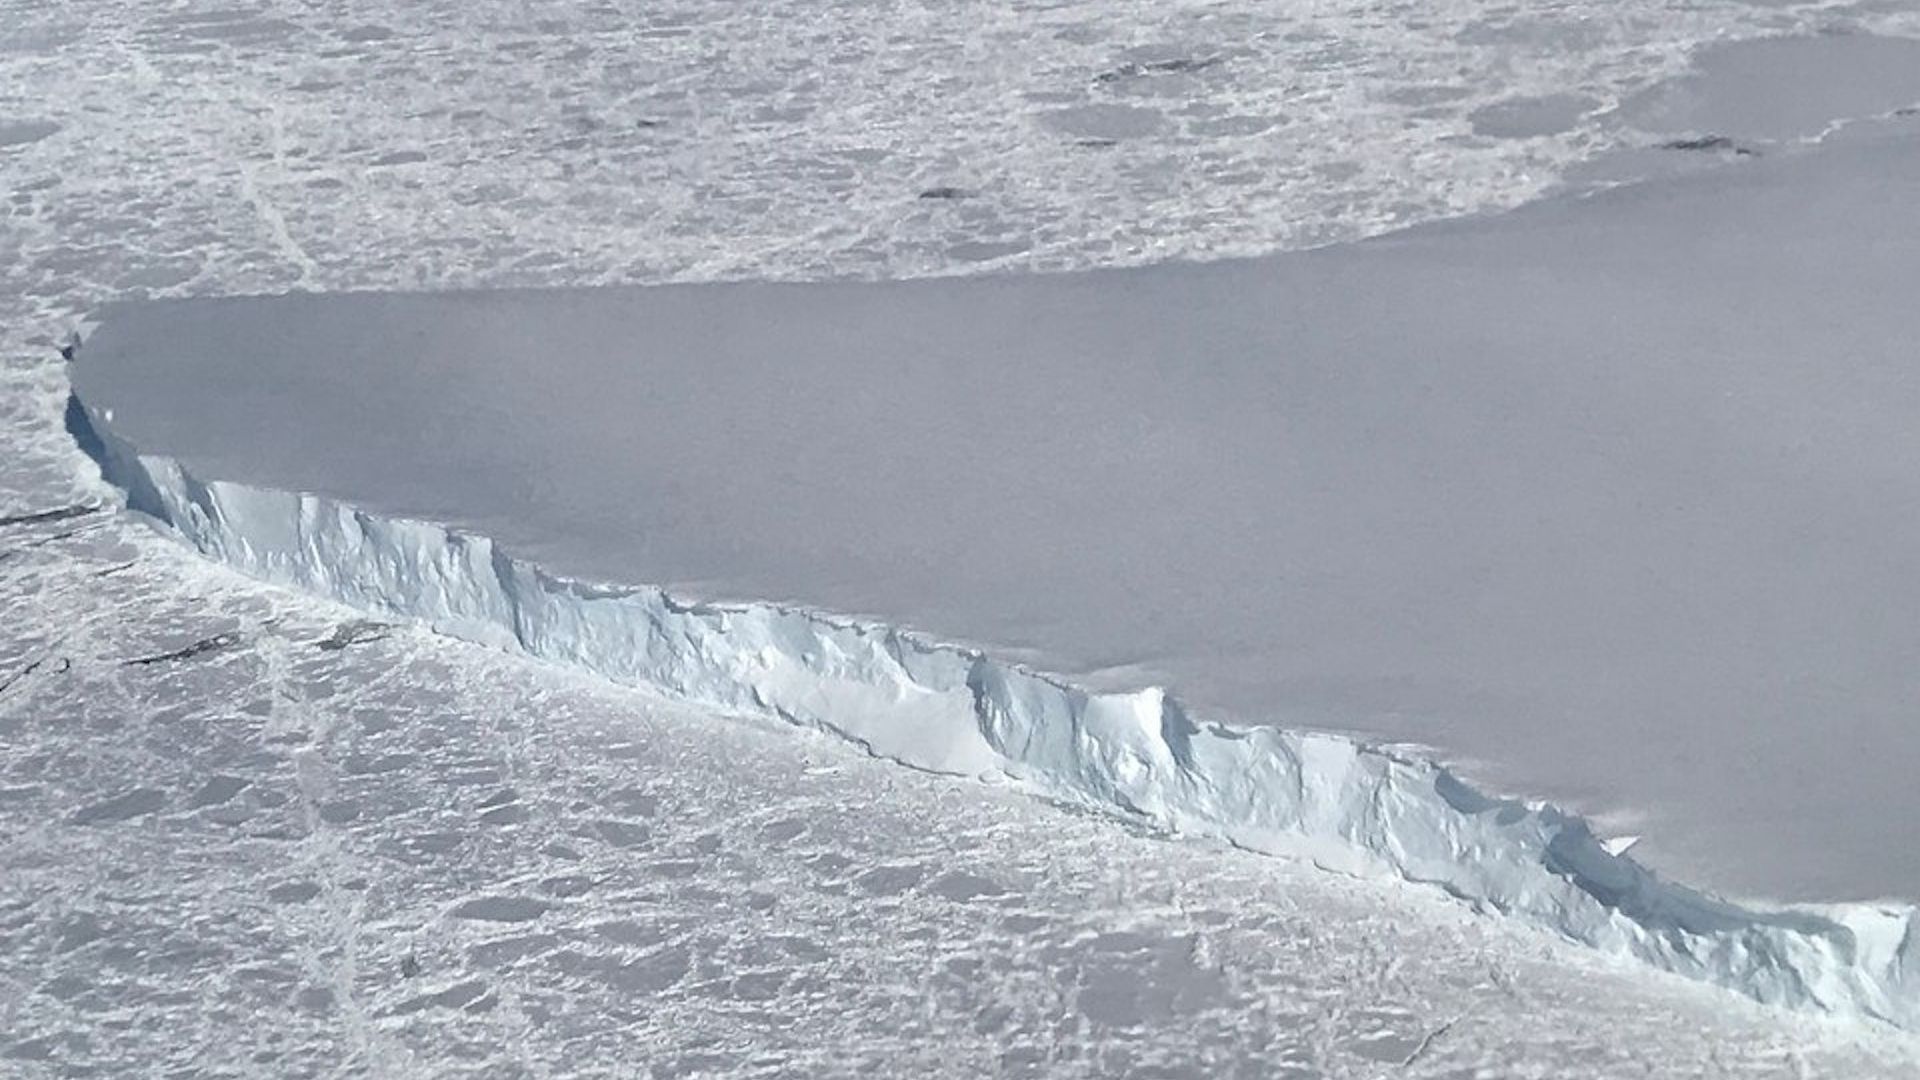 An inlet filled with sea ice around Venable Ice Shelf.